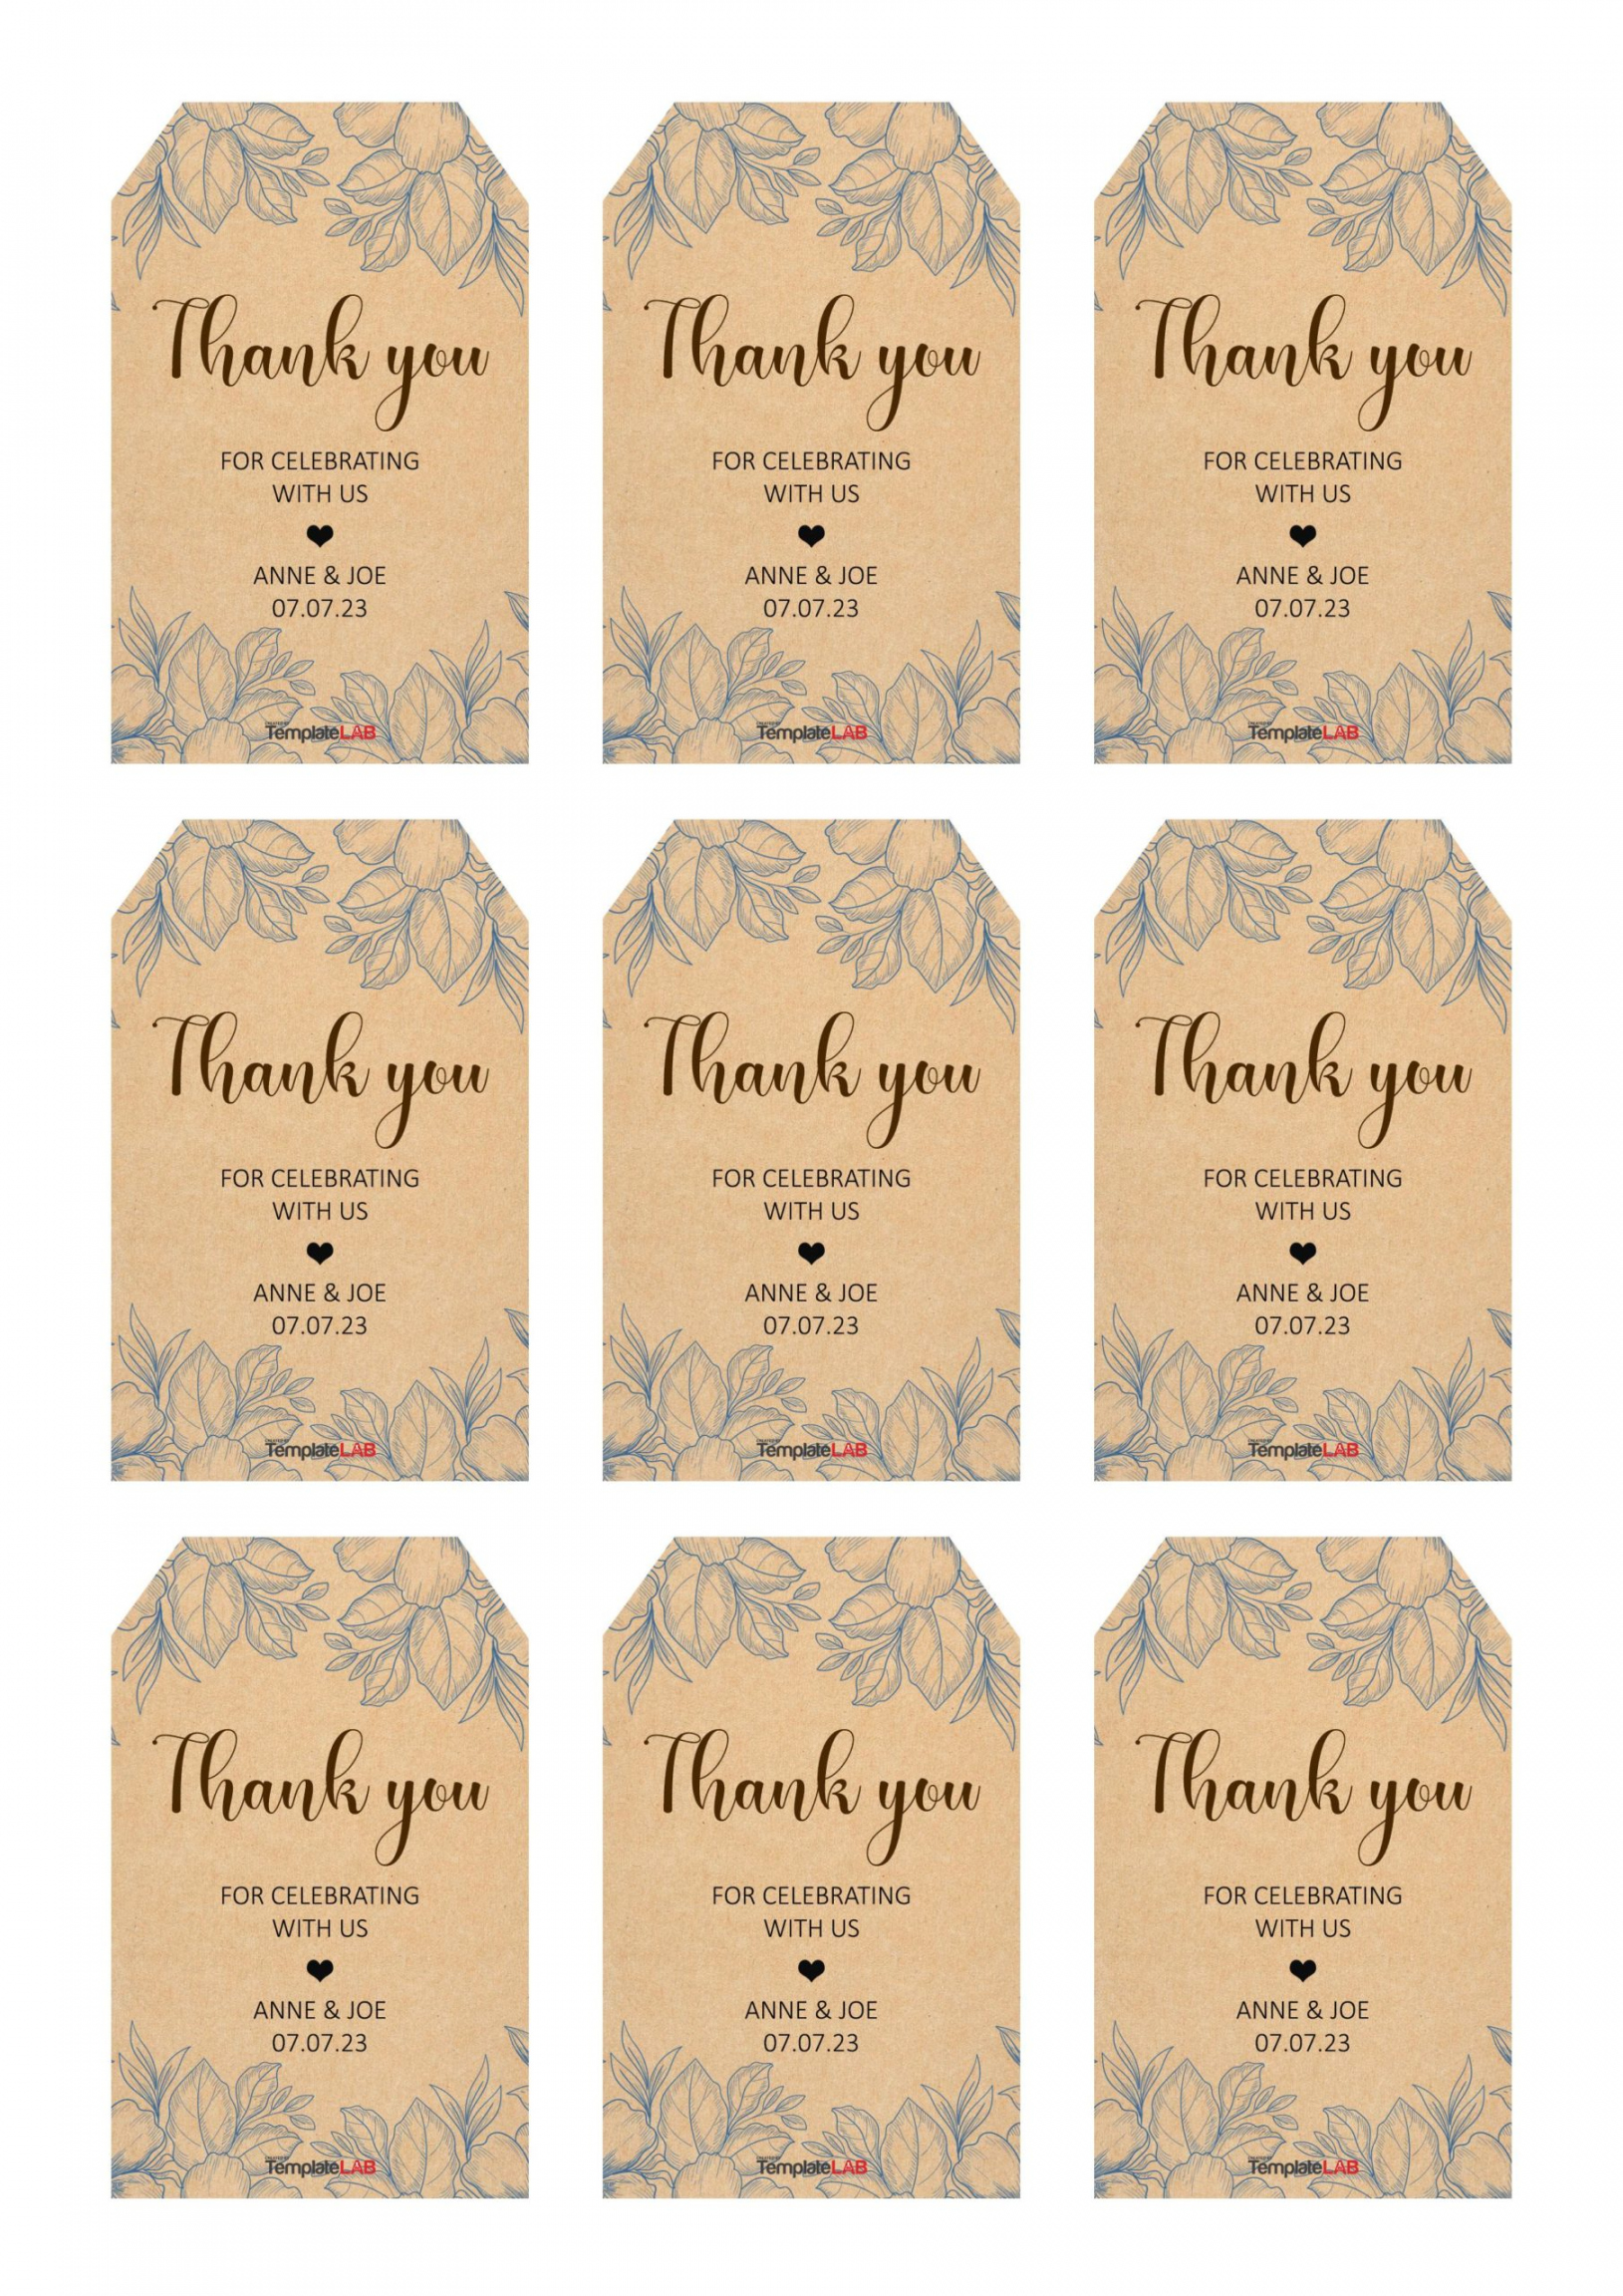 Free Editable Gift Tag Templates [Word, PPTX, PSD] - FREE Printables - Free Printable Gift Tag Templates For Word